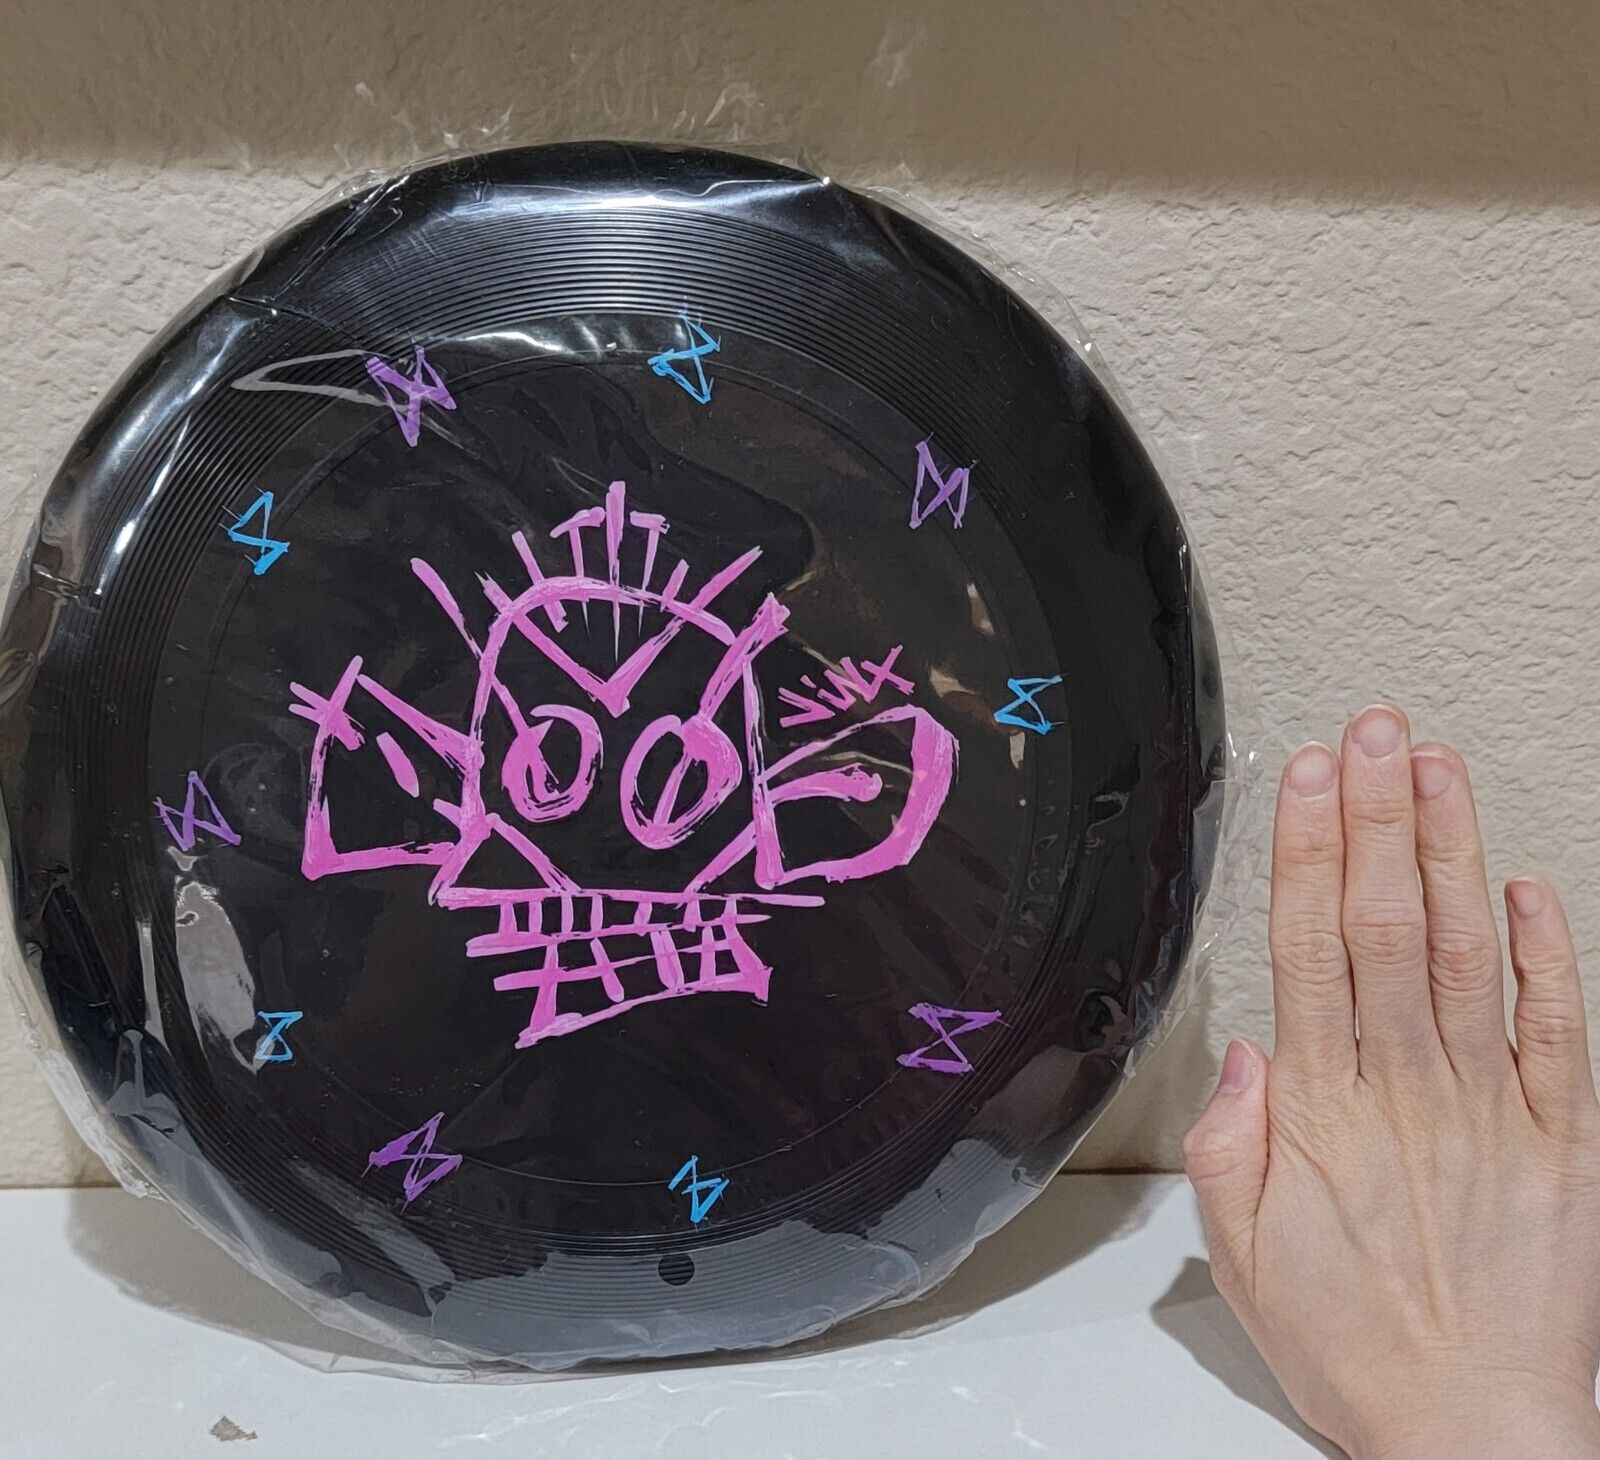 EXTREMELY RARE LIMITED Arcane Jinx Powder Frisbee Flying Disc League of Legends